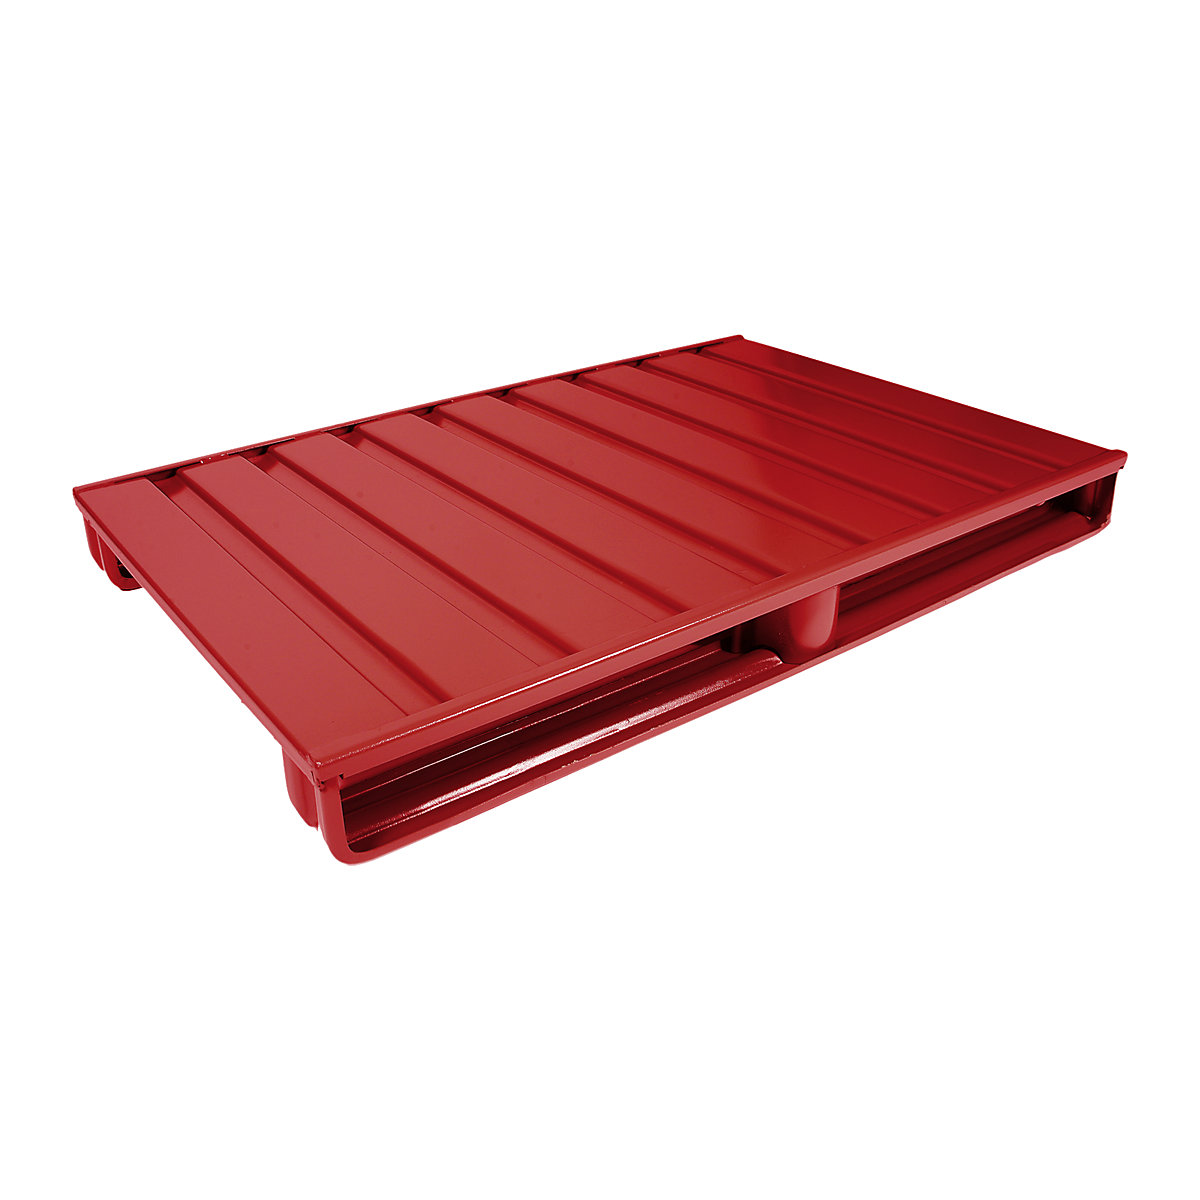 Flat steel pallet – Heson, LxW 1200 x 1000 mm, max. load 2000 kg, flame red, 10+ items-2